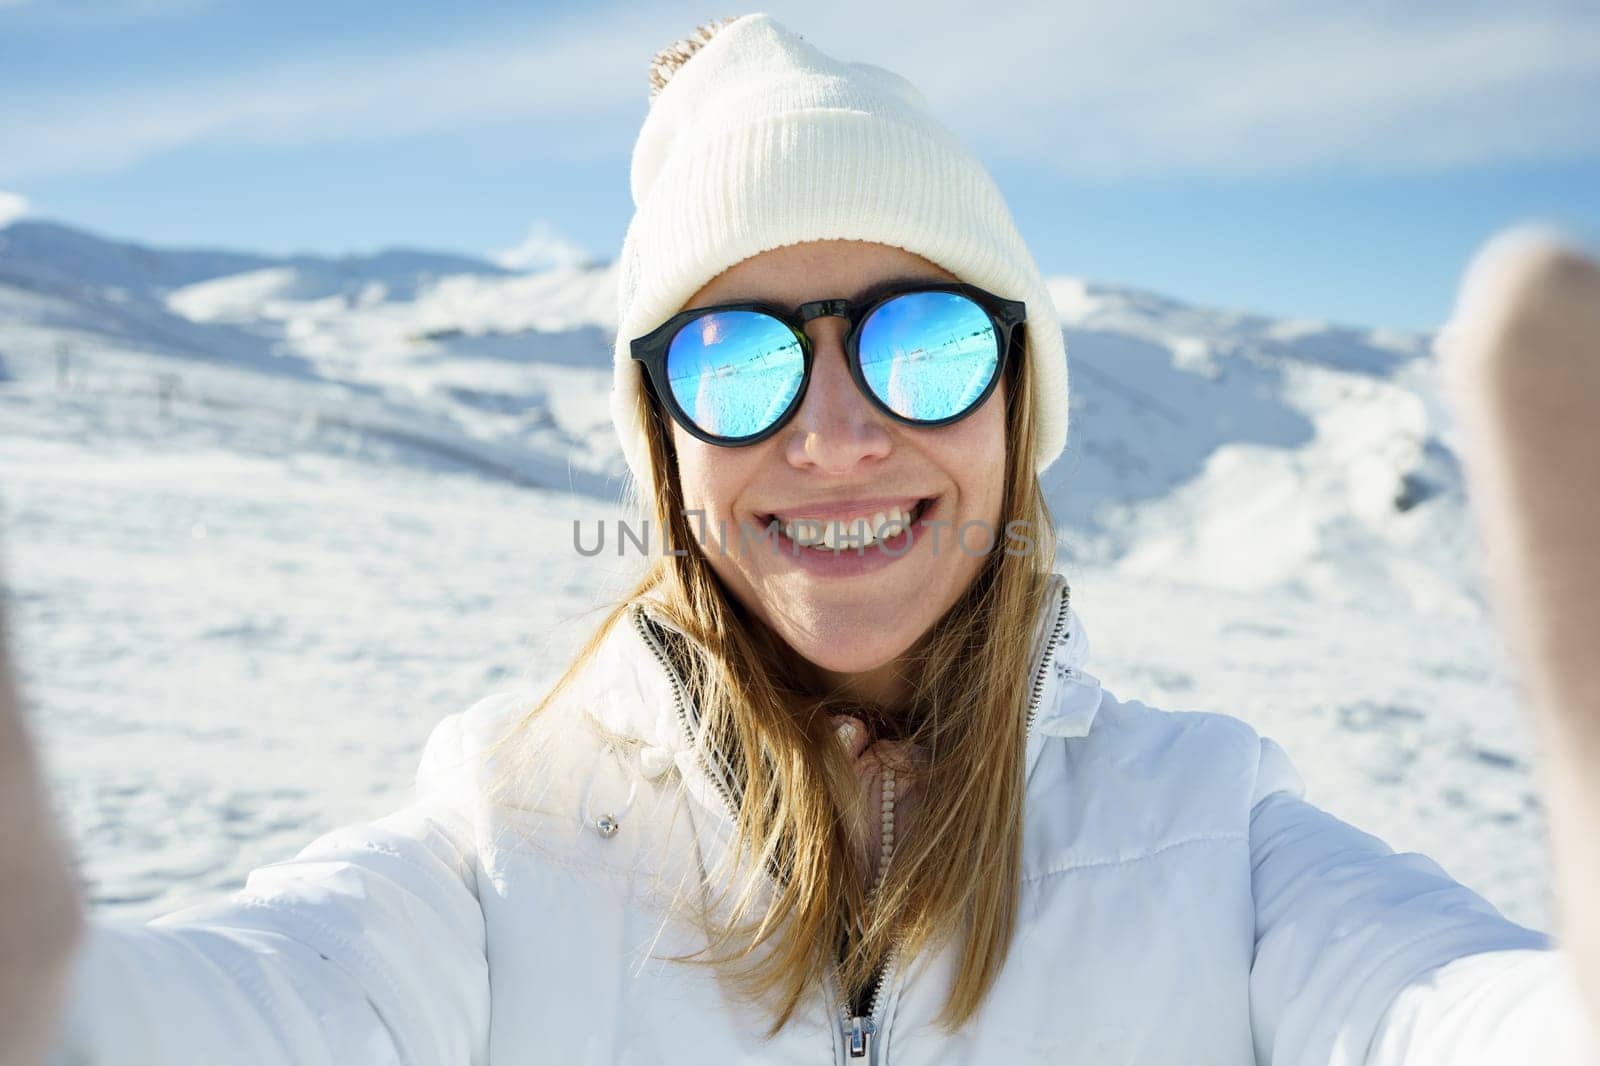 Cheerful woman in sunglasses taking selfie in snowy mountains by javiindy